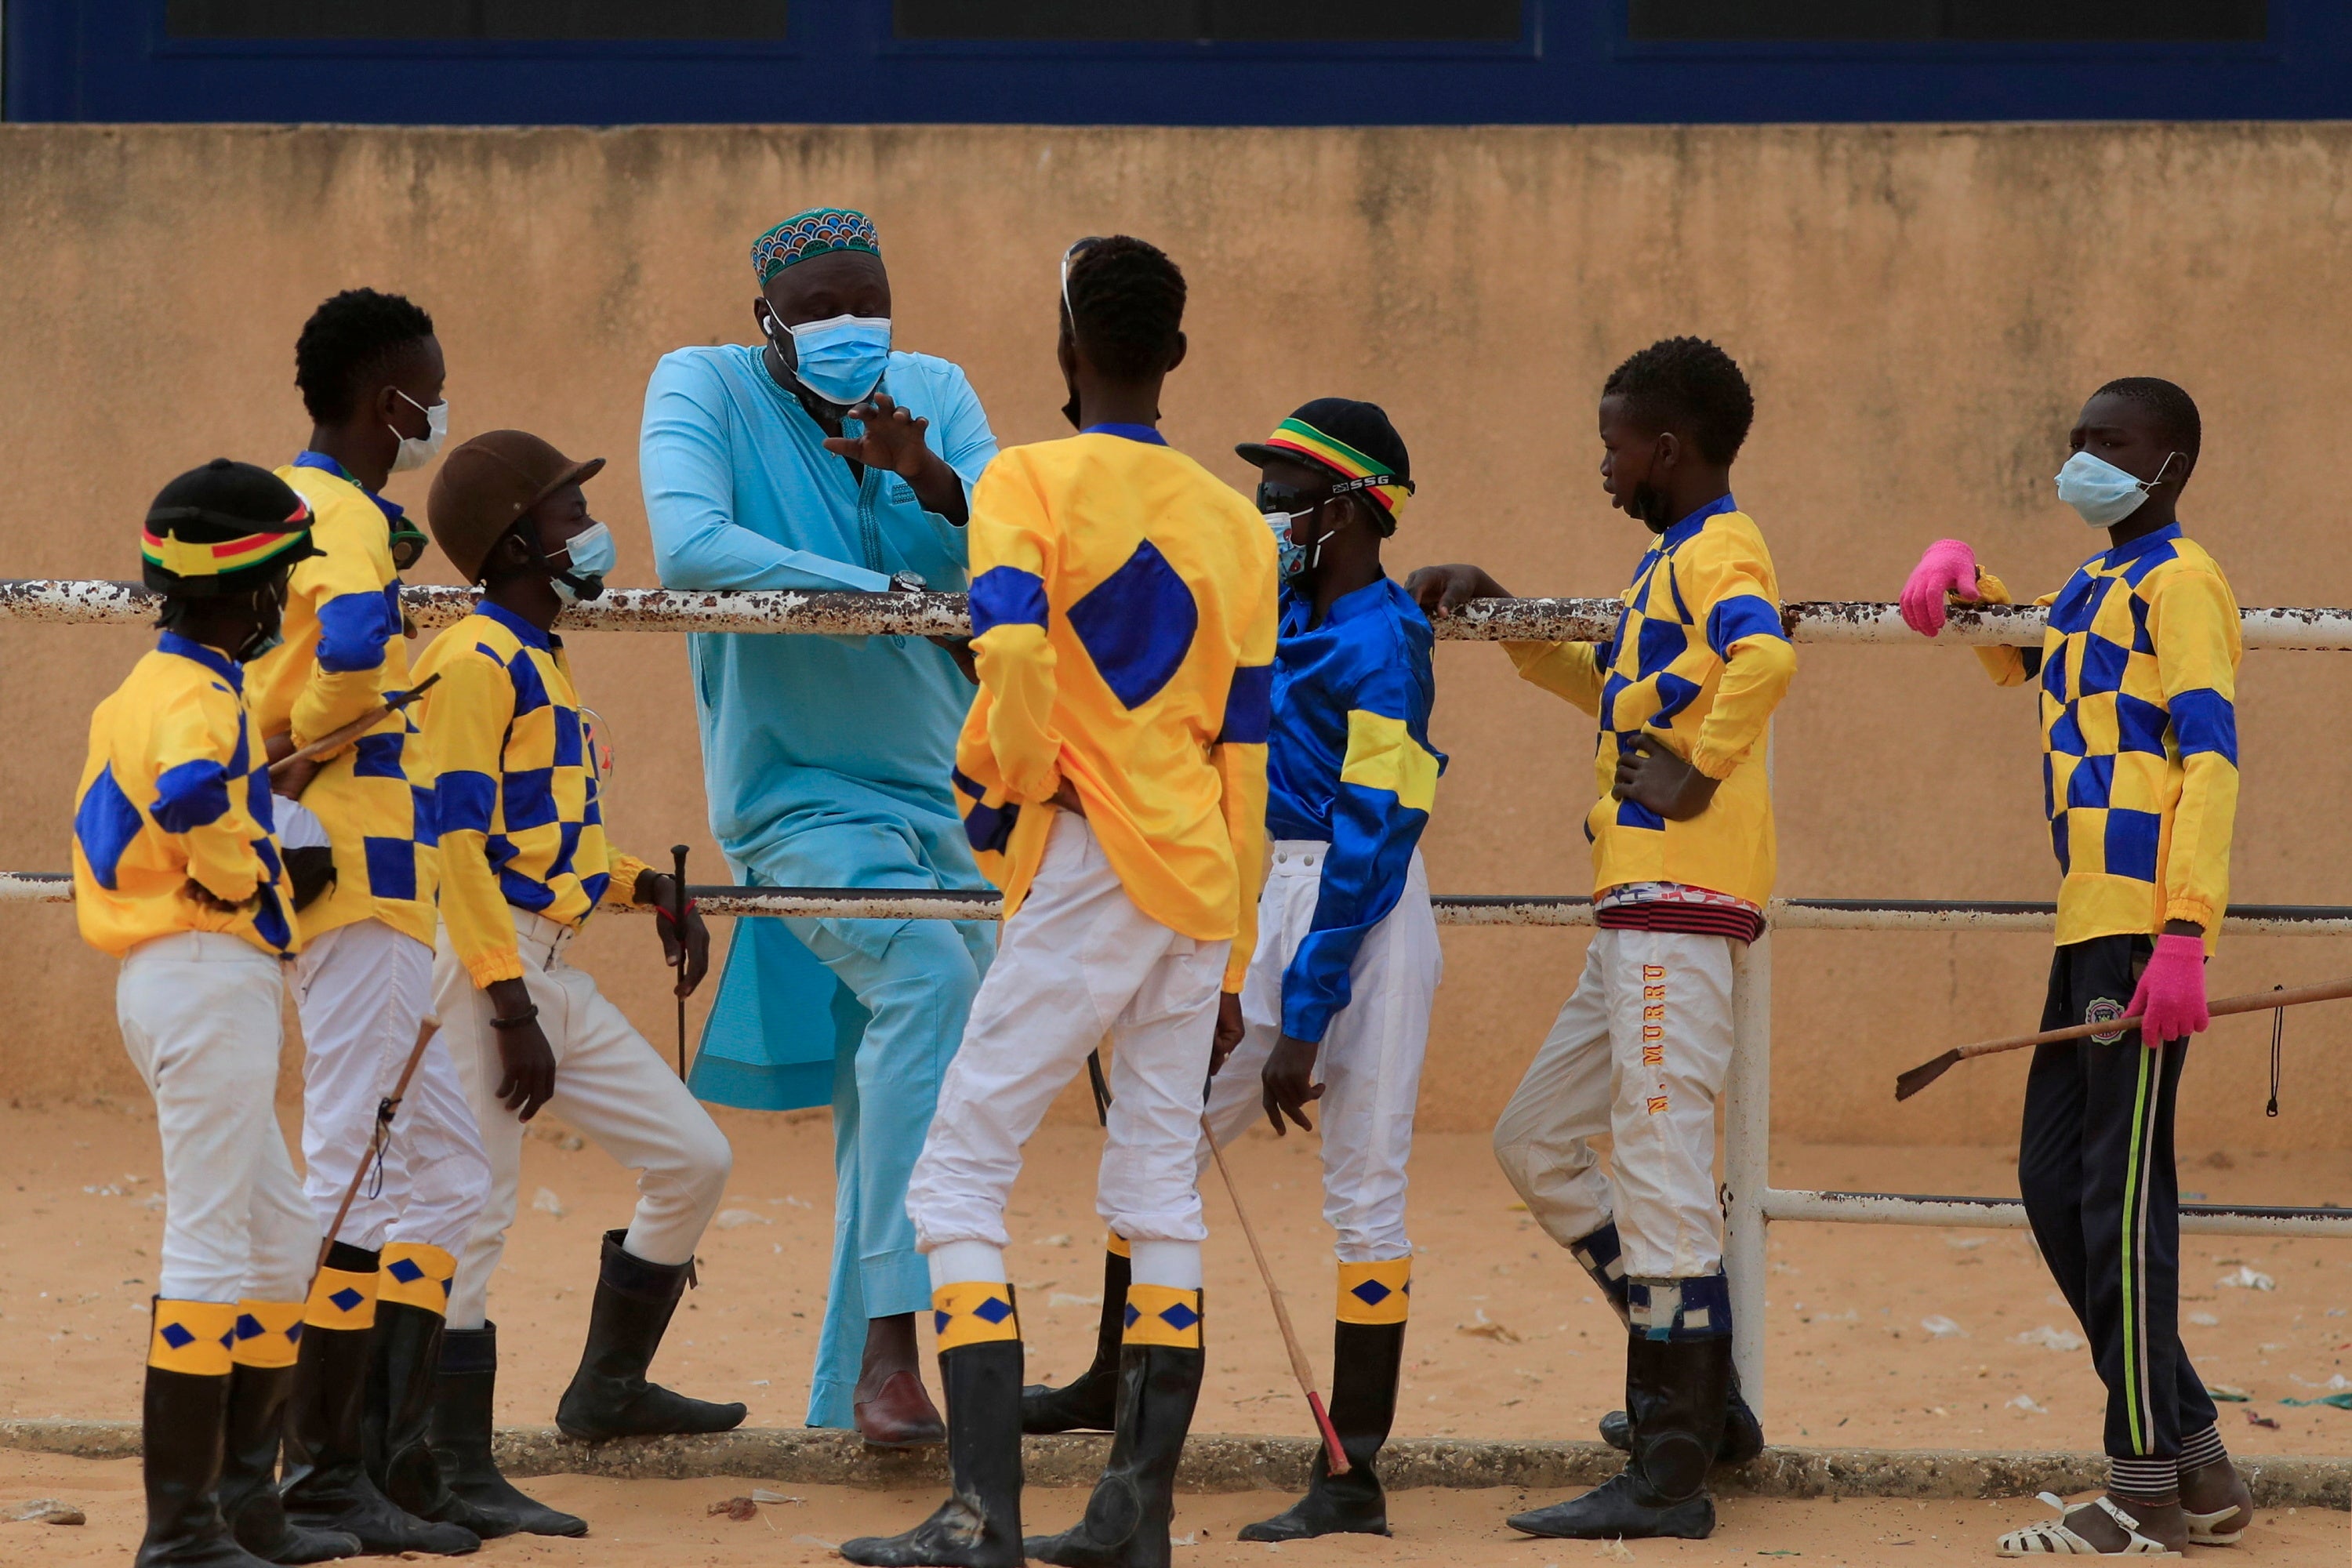 Adama Bao, a coach who owns the Lambafar stable, speaks to Diop and other jockeys before a race